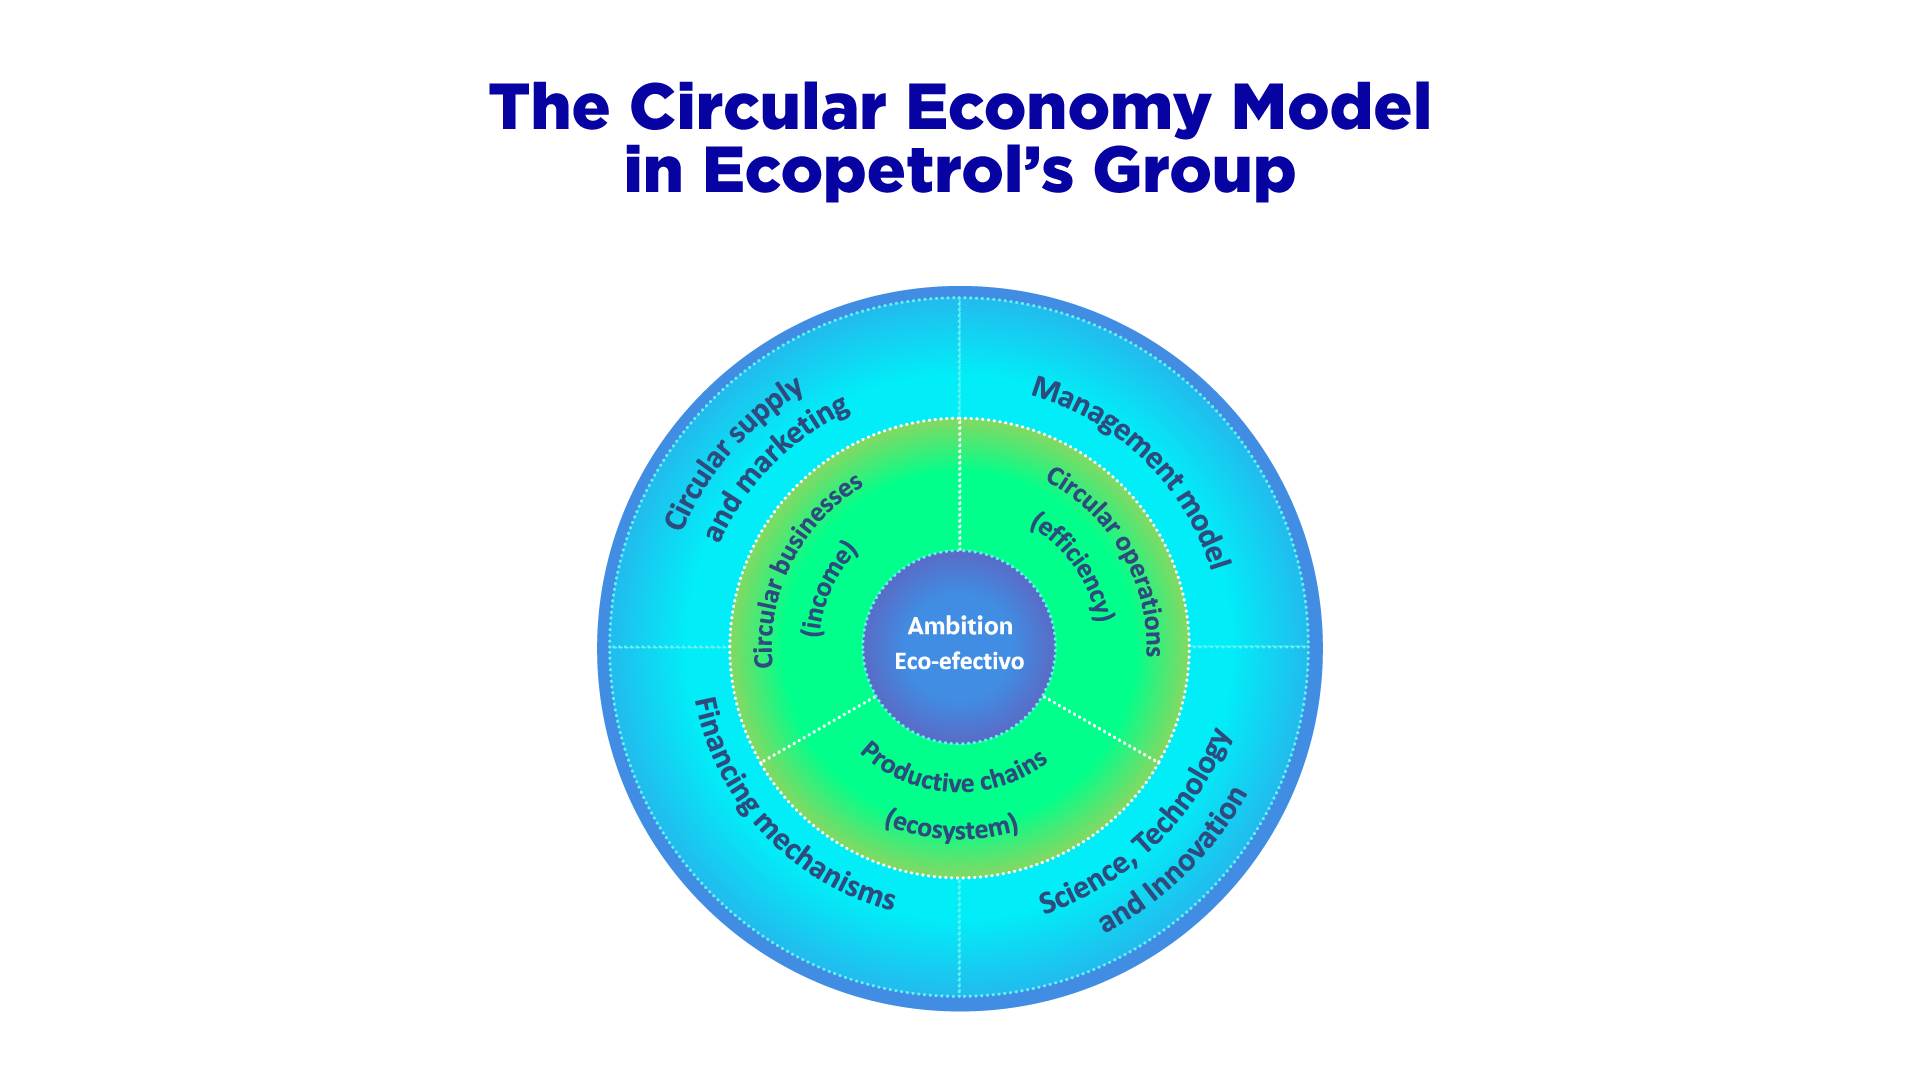 The Circular Economy model in Ecopetrol’s Group